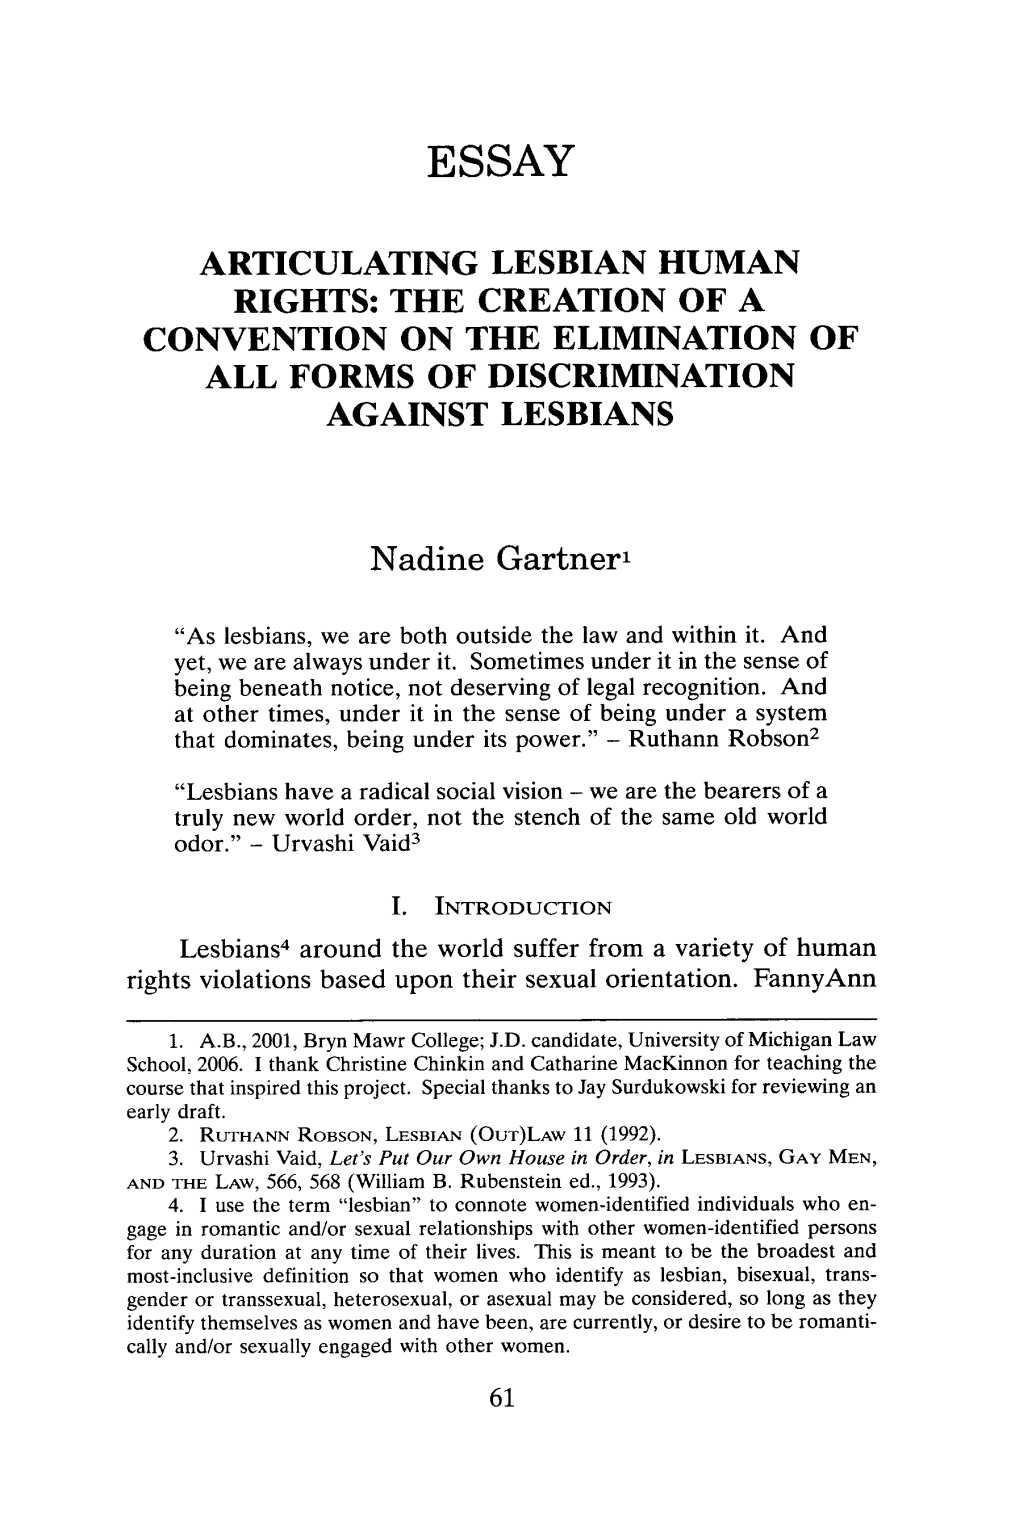 Articulating Lesbian Human Rights: the Creation of a Convention on the Elimination of All Forms of Discrimination Against Lesbians